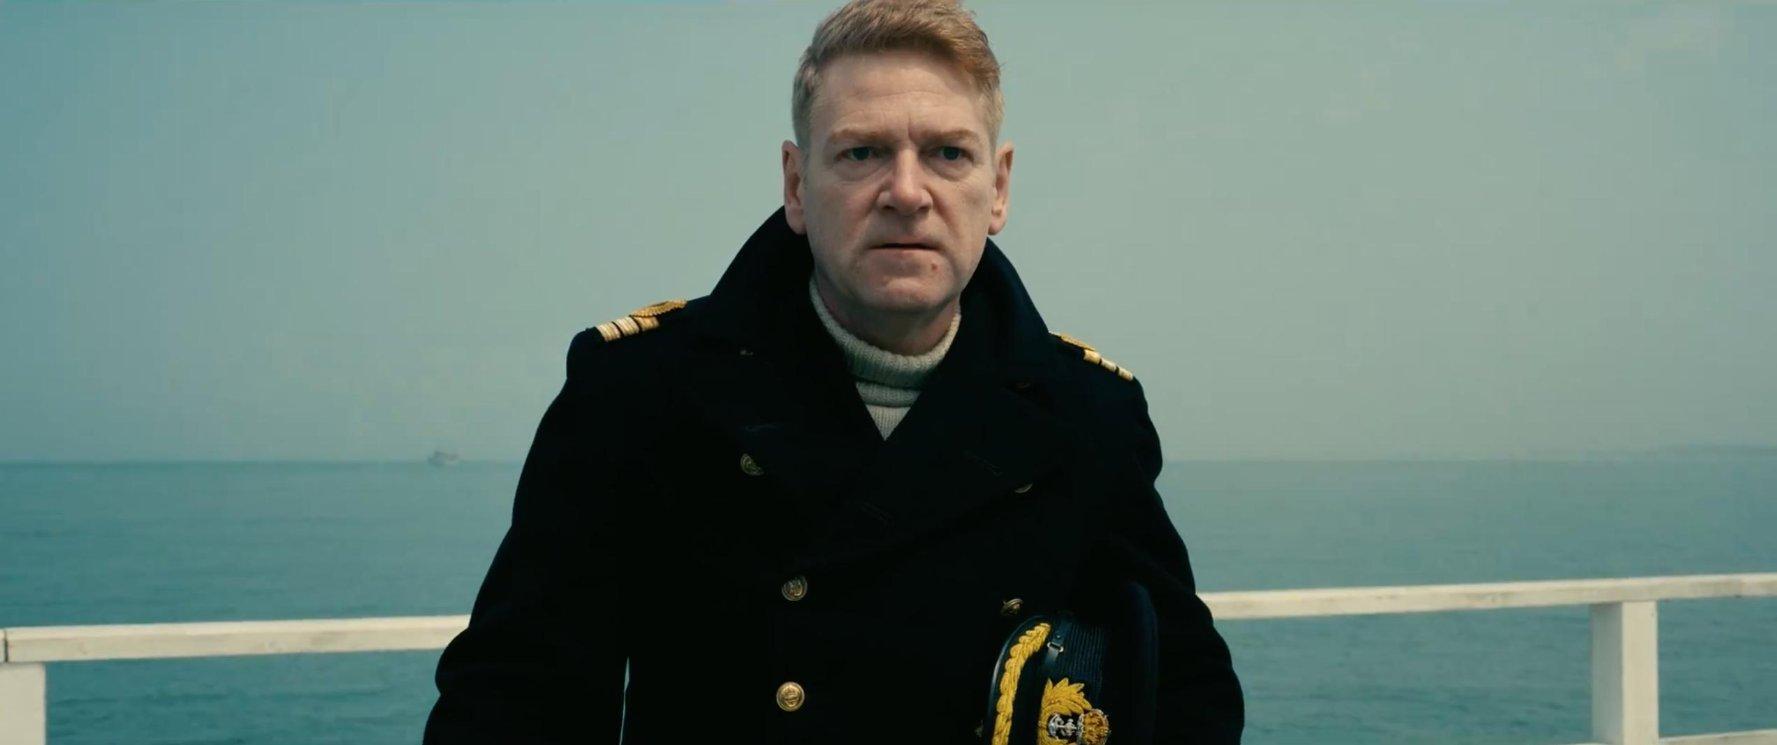 Dunkirk Kenneth Branagh wallpapers 2018 in Dunkirk